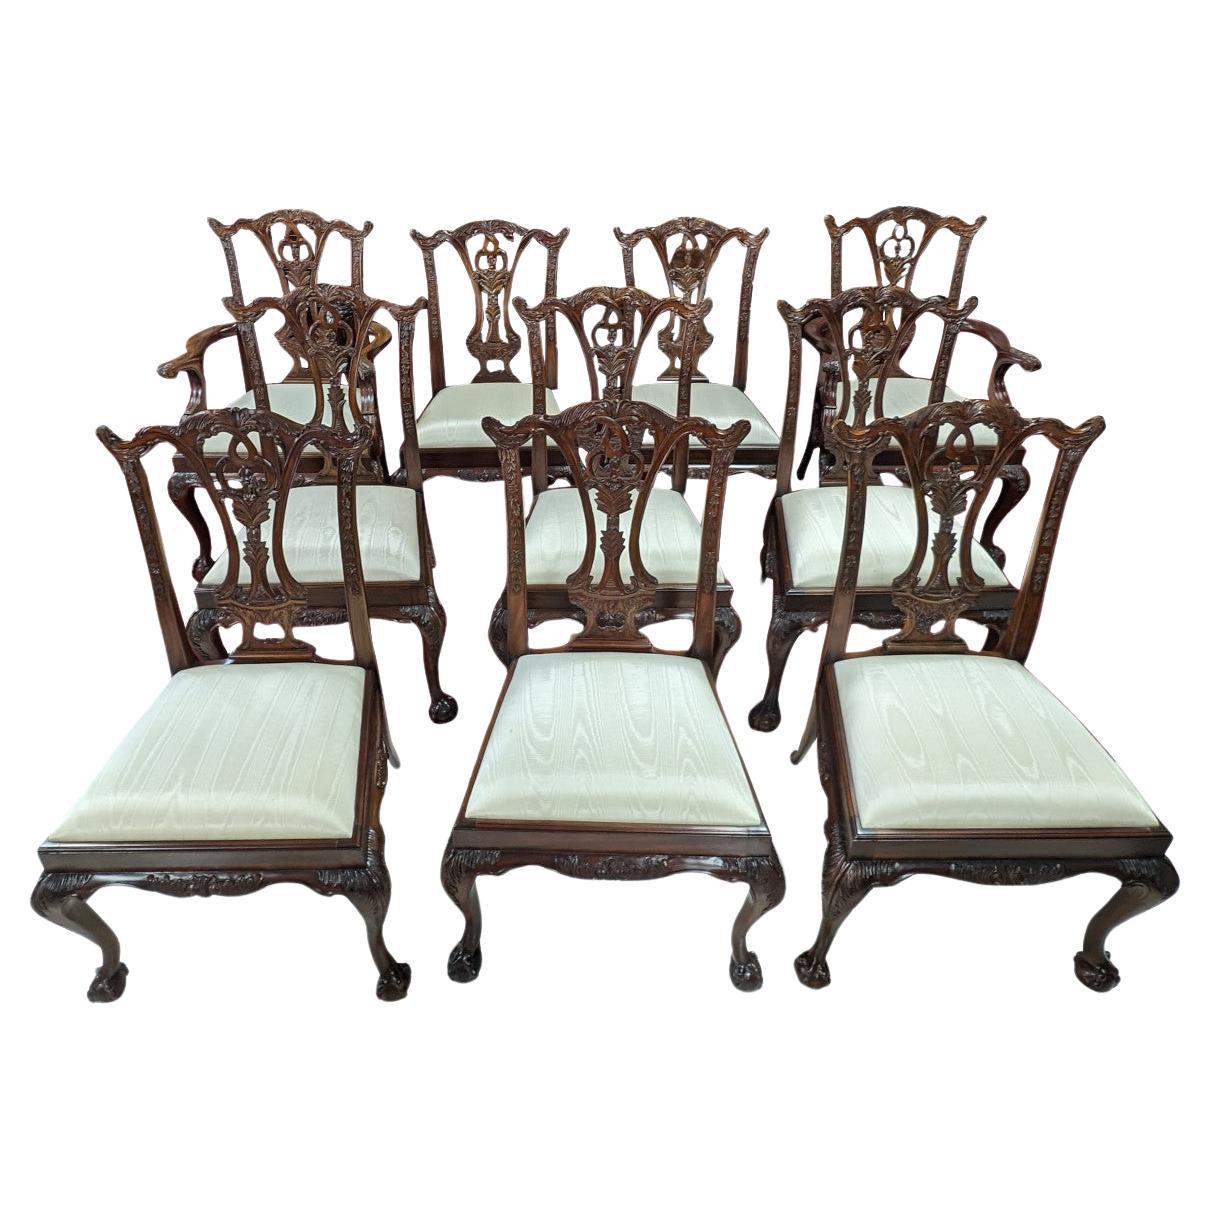 10 Maitland Smith “Philadelphia” Chippendale Style Dining Chairs For Sale